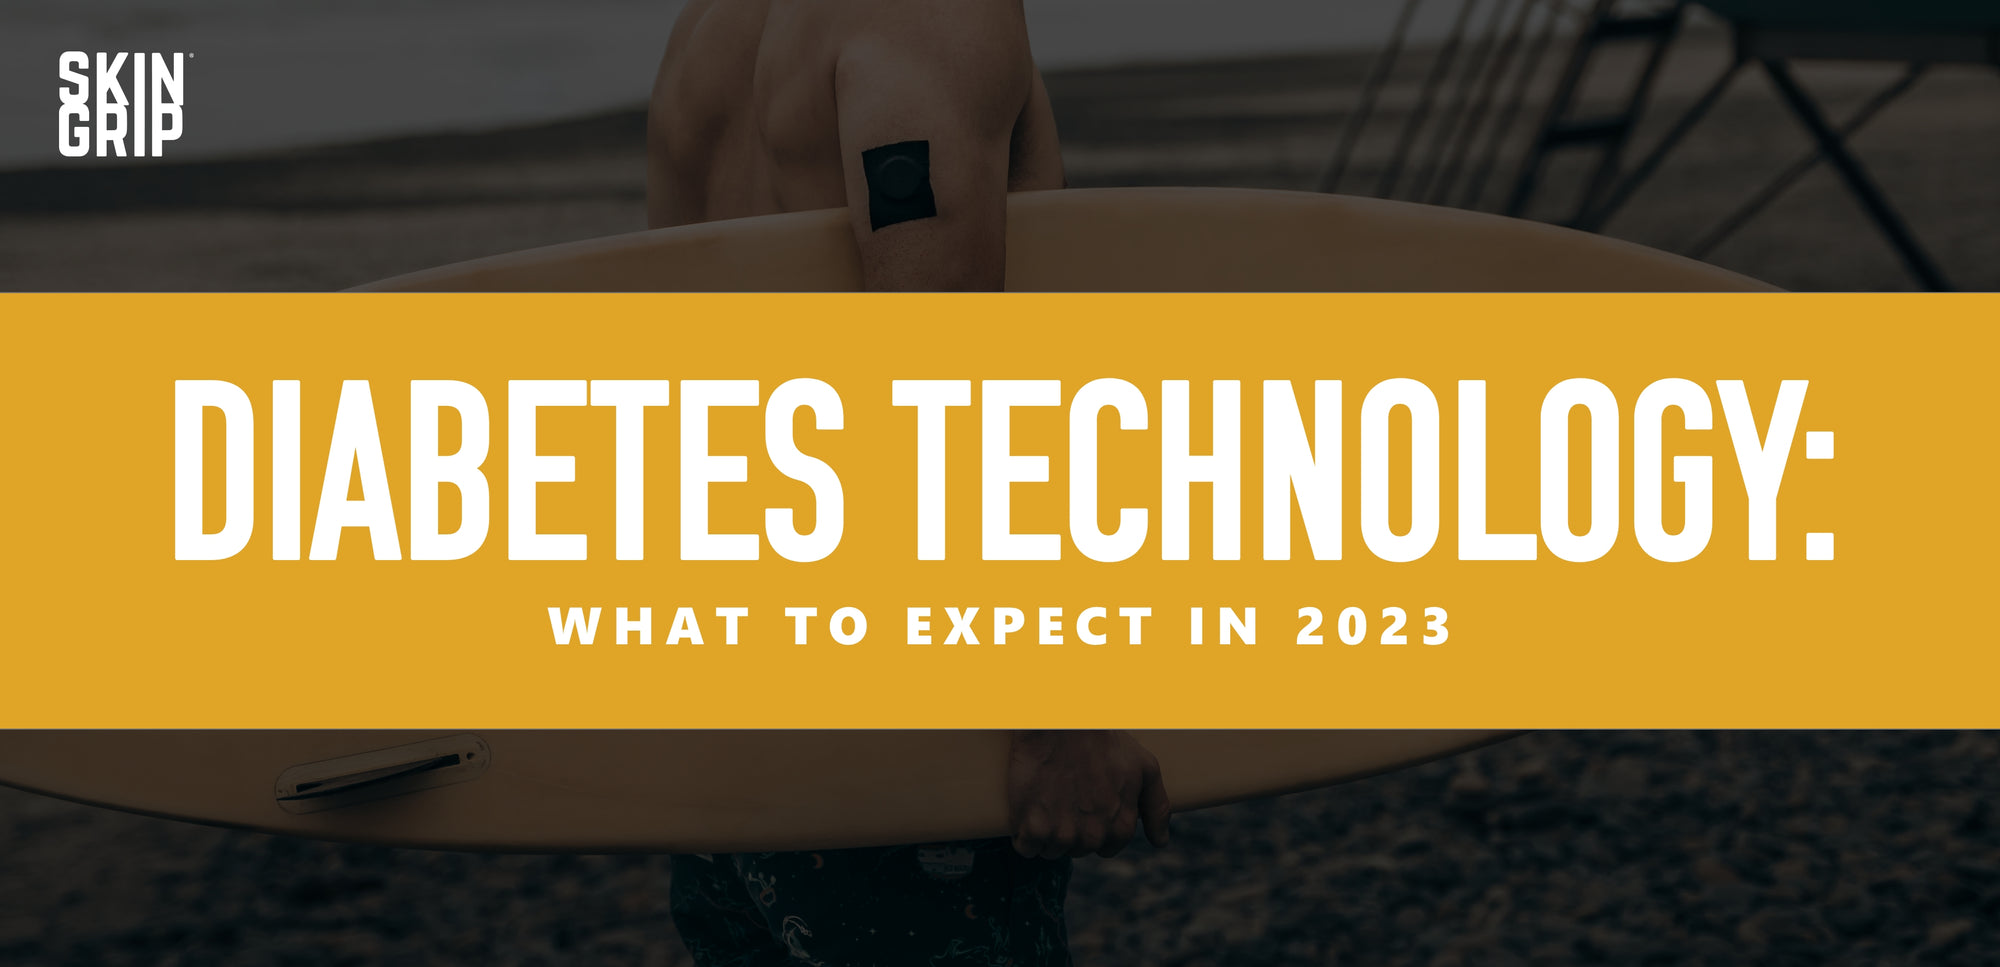 Diabetes Technology: What to Expect in 2023